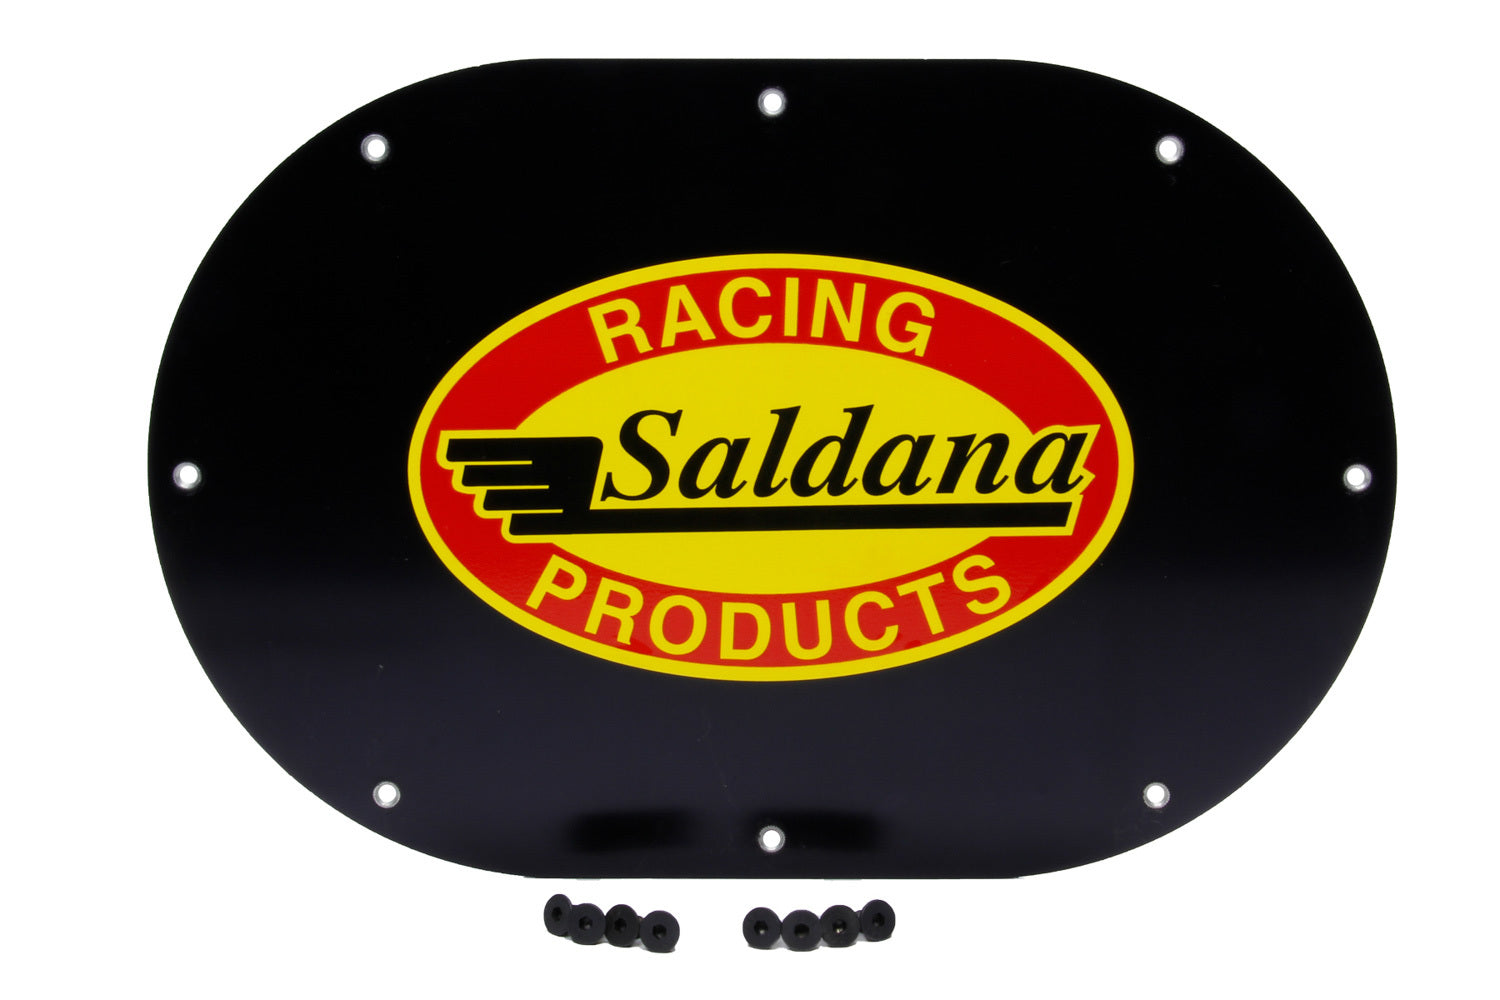 Saldana Front Cover Plate 4x6 For Sprint Cells PLASAC-002